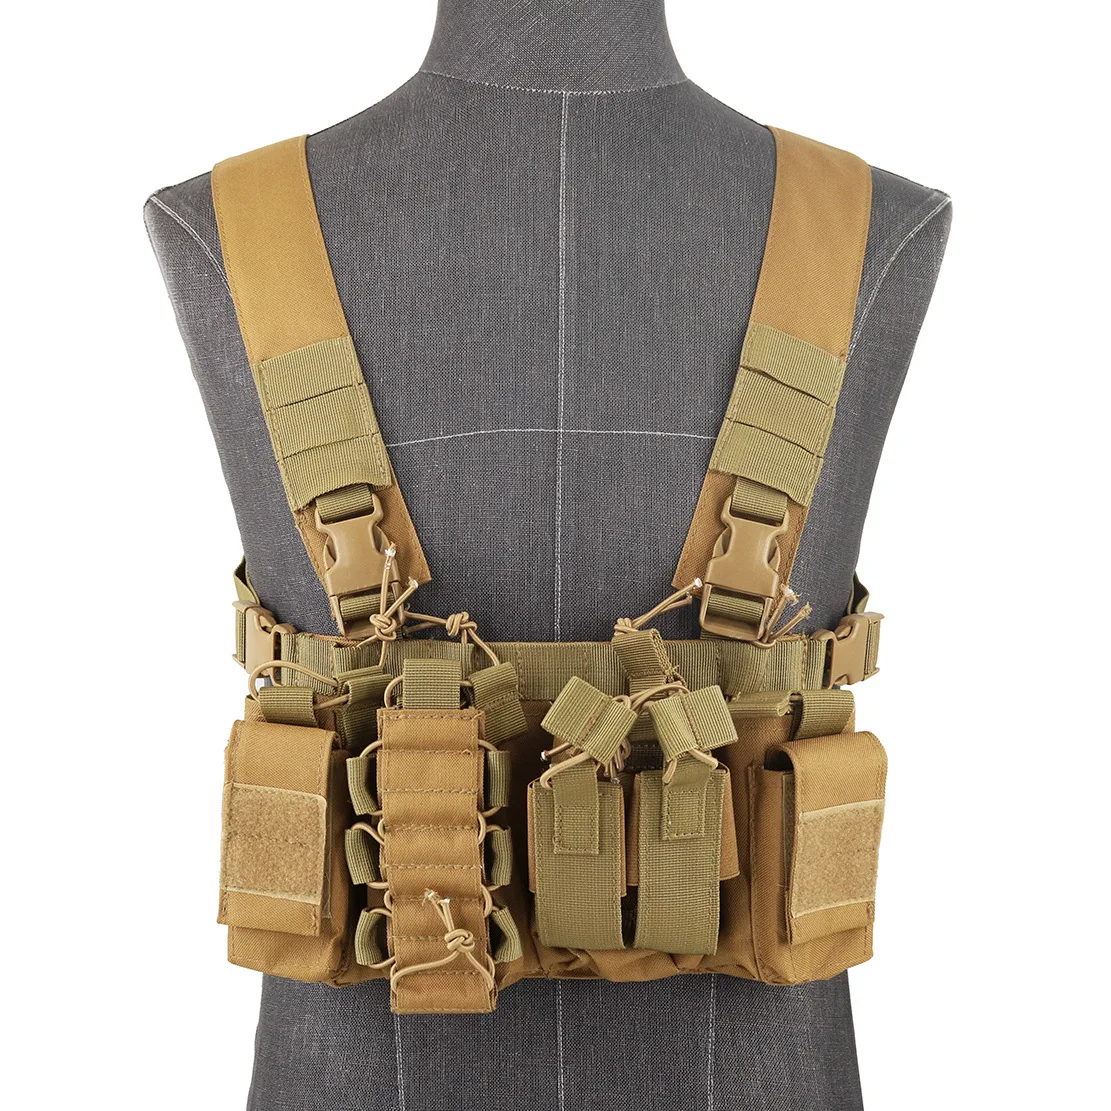 

Tactical Apron Chest Hanging Vest MC All-terrain Camouflage Lightweight Bust D3 Outdoor Hiking Hunting Shooting Gear